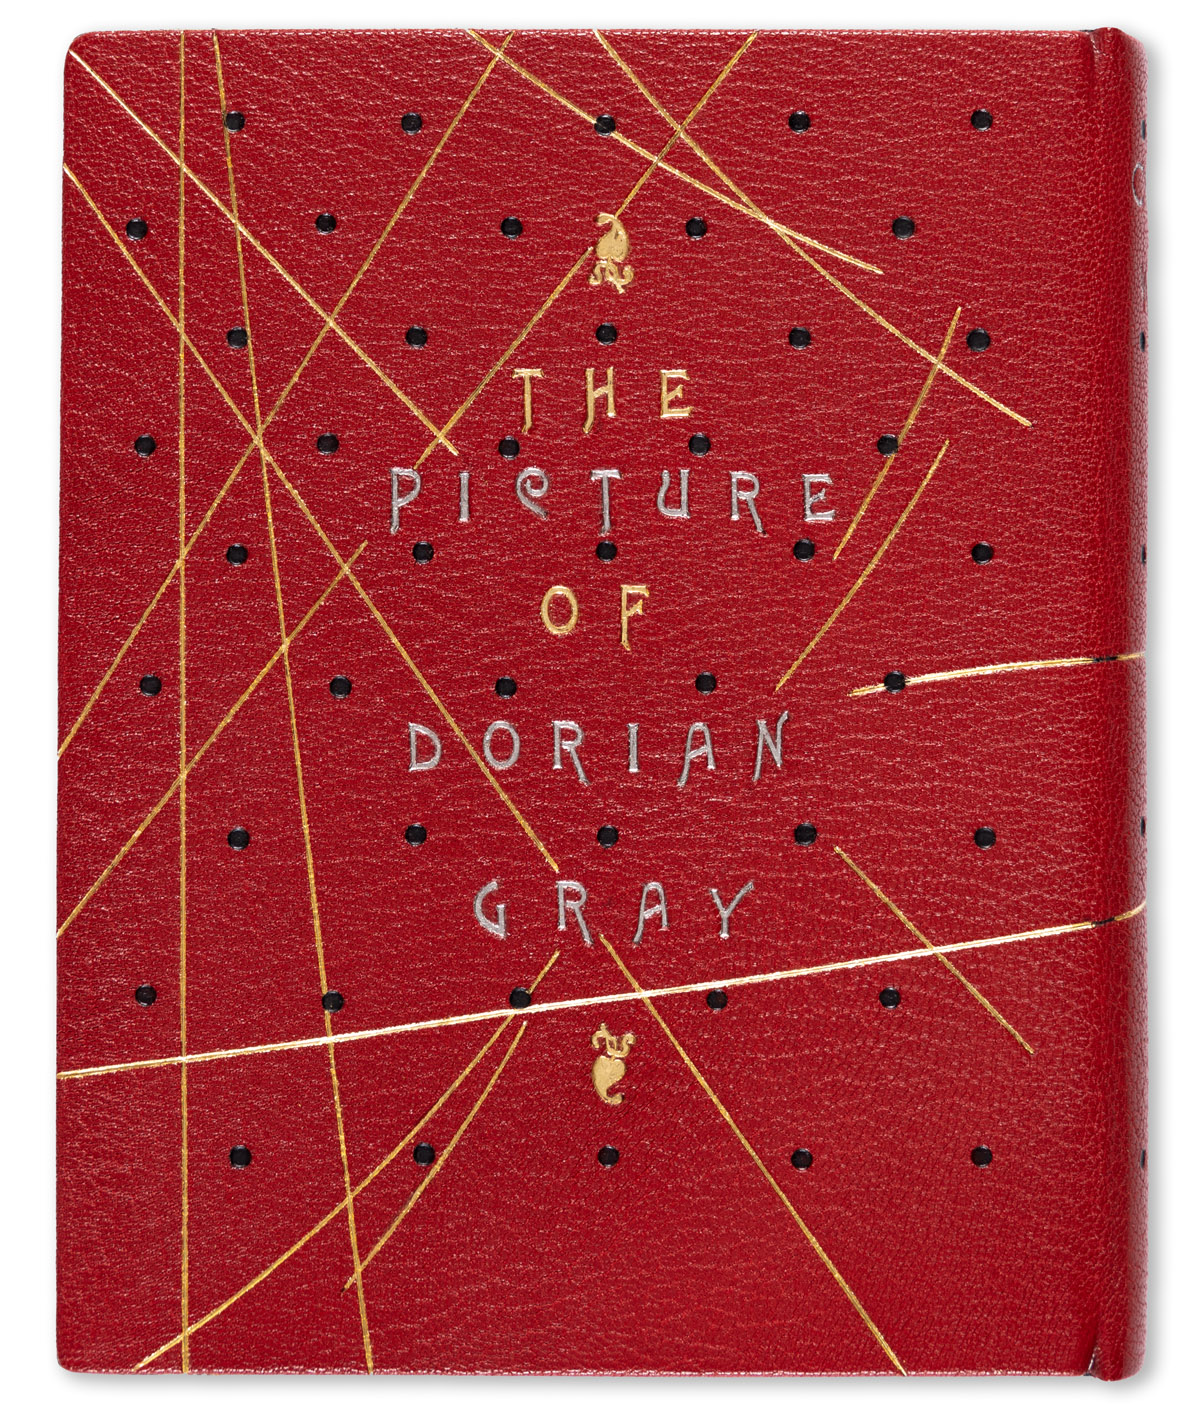 OSCAR WILDE (1854-1900) The Picture of Dorian Gray.